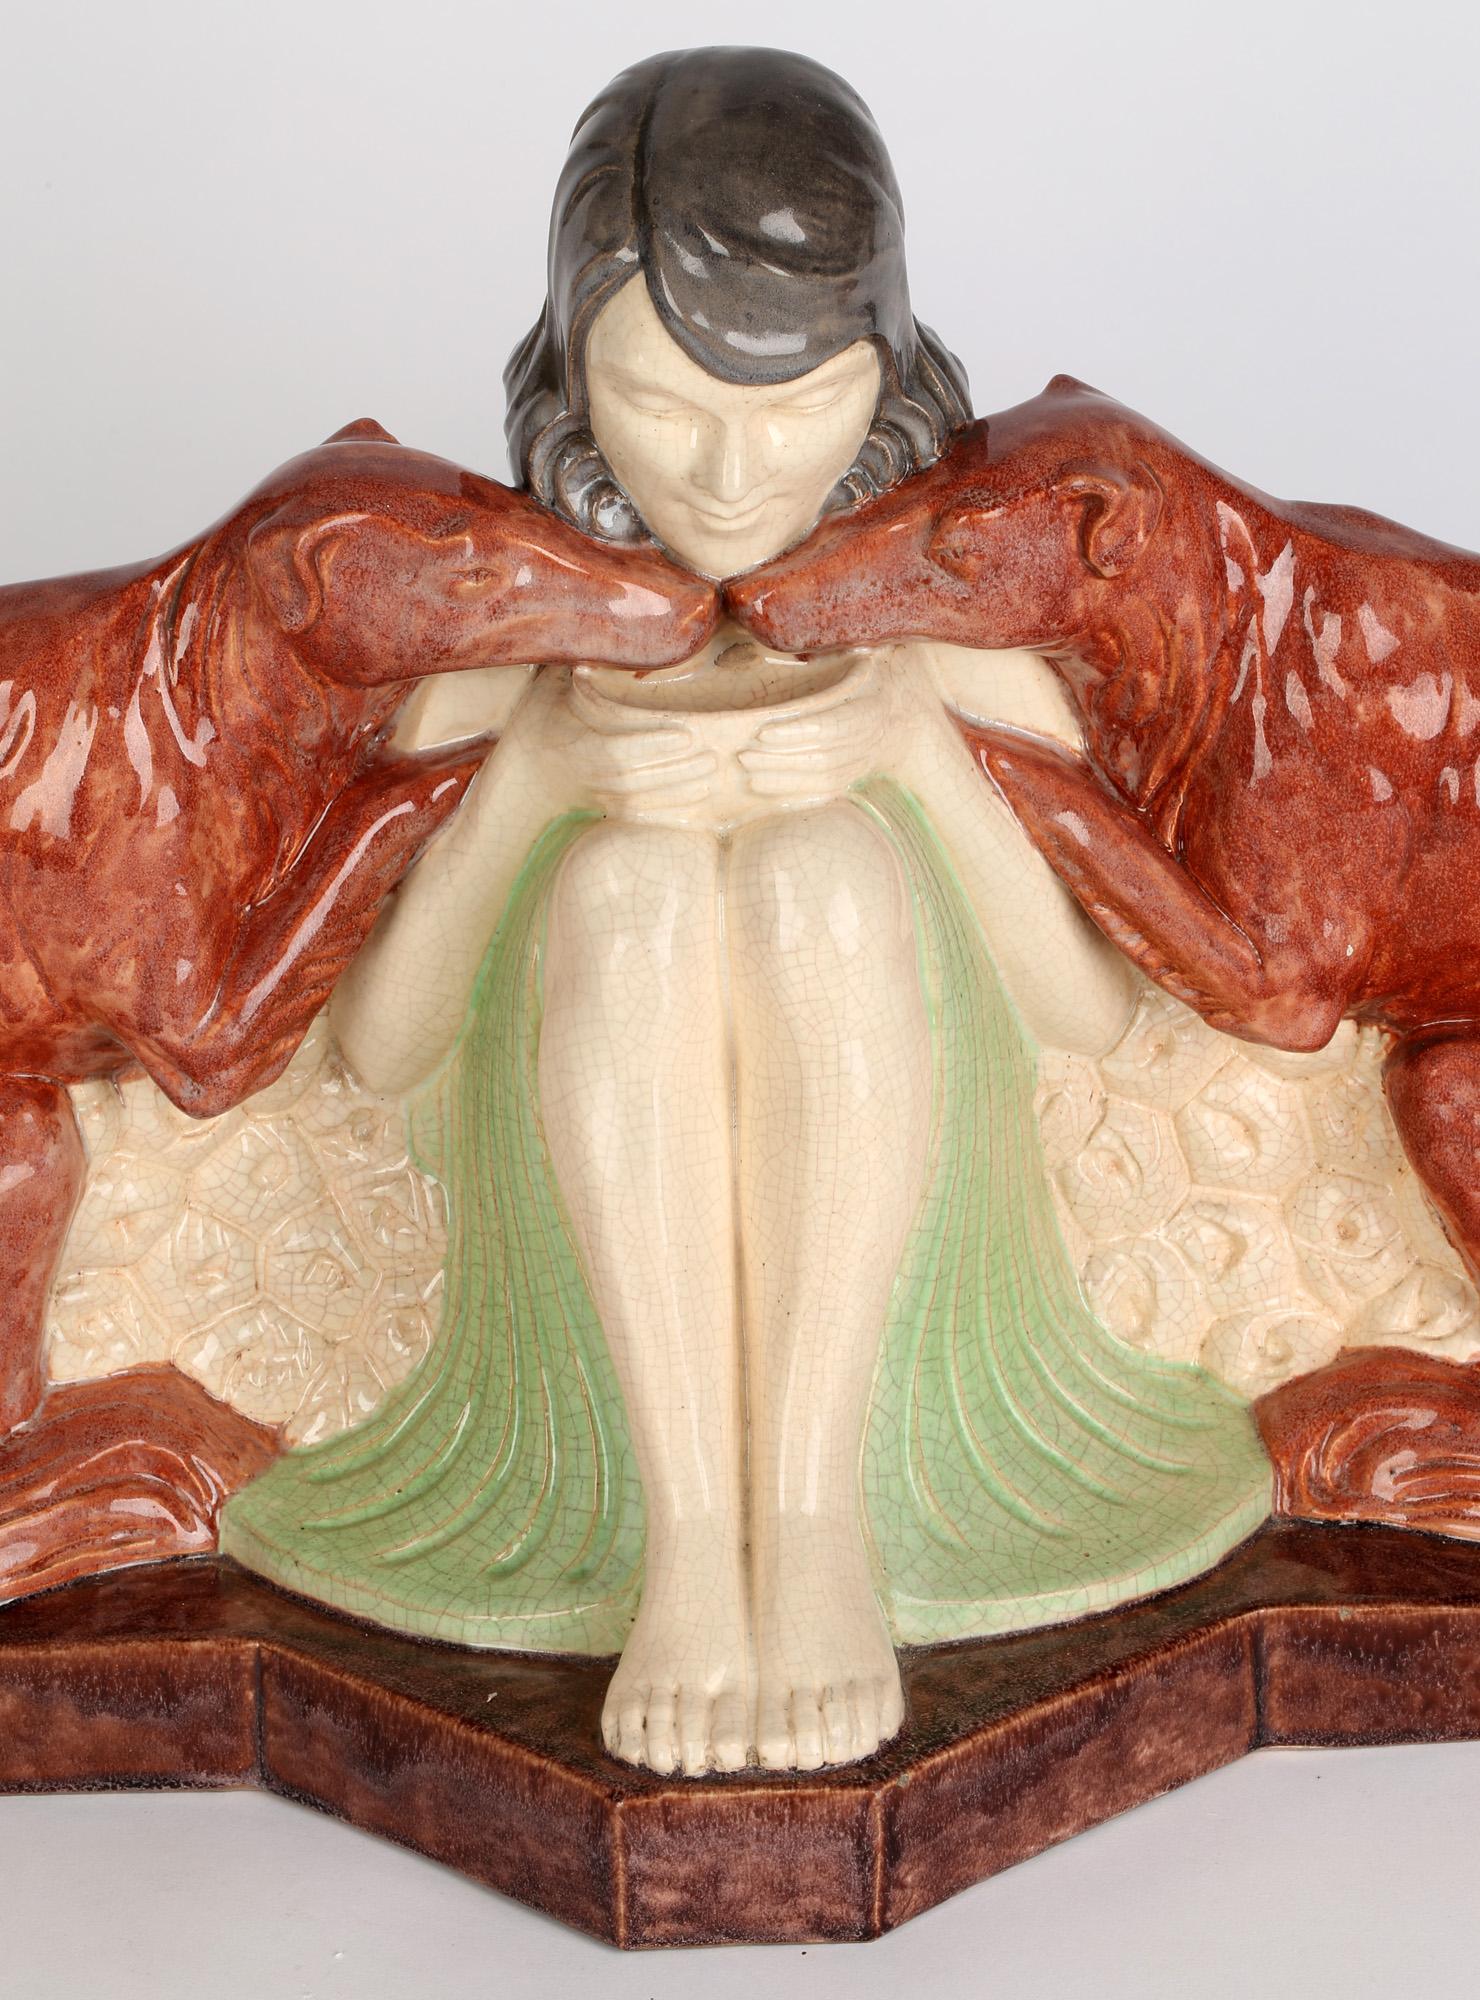 An exceptional and large impressive French Art Deco earthenware figural study of a seated young naked girl sat between two Borzoi hounds by Armand Godard produced by Marcel Guillard (1896-1932) for Editions Etling, Paris and dating from around 1925.